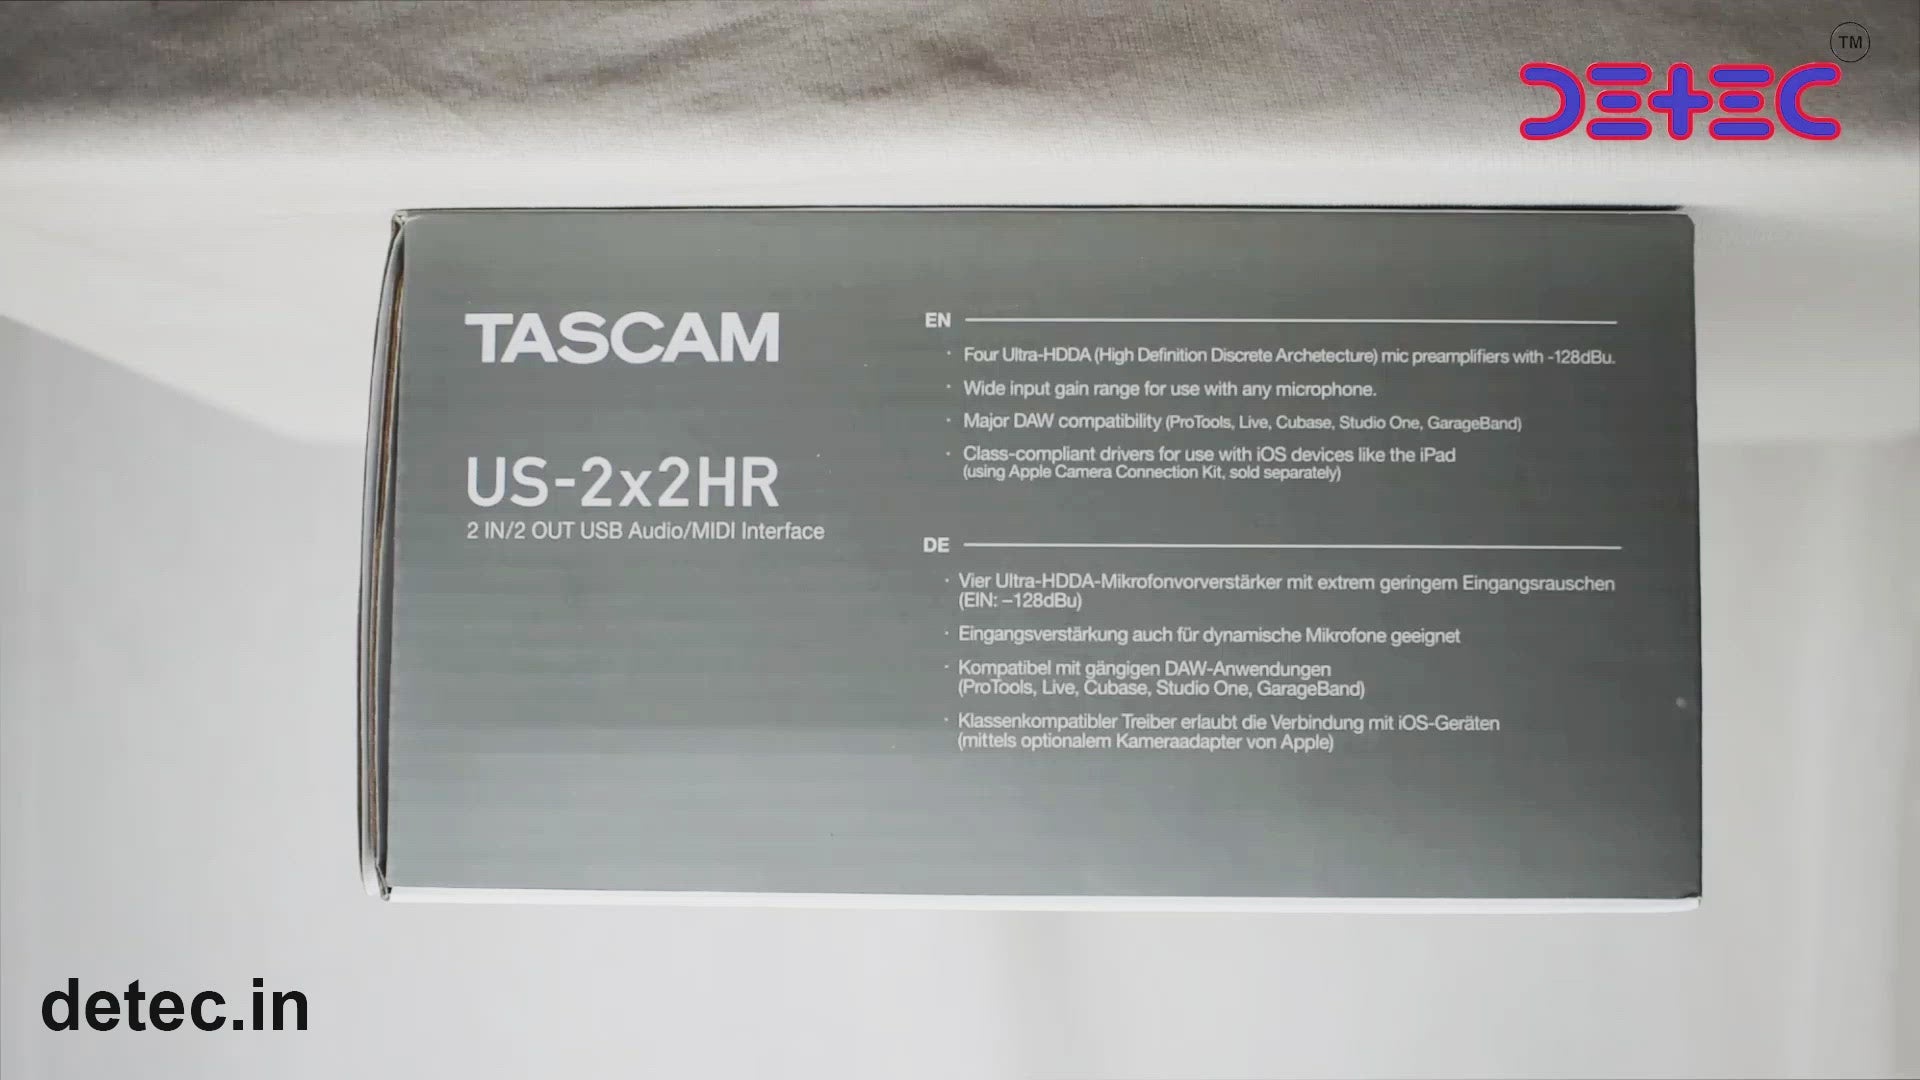 Tascam US-2x2HR Two Mic 2IN/2OUT High Resolution Versatile USB Audio Interface